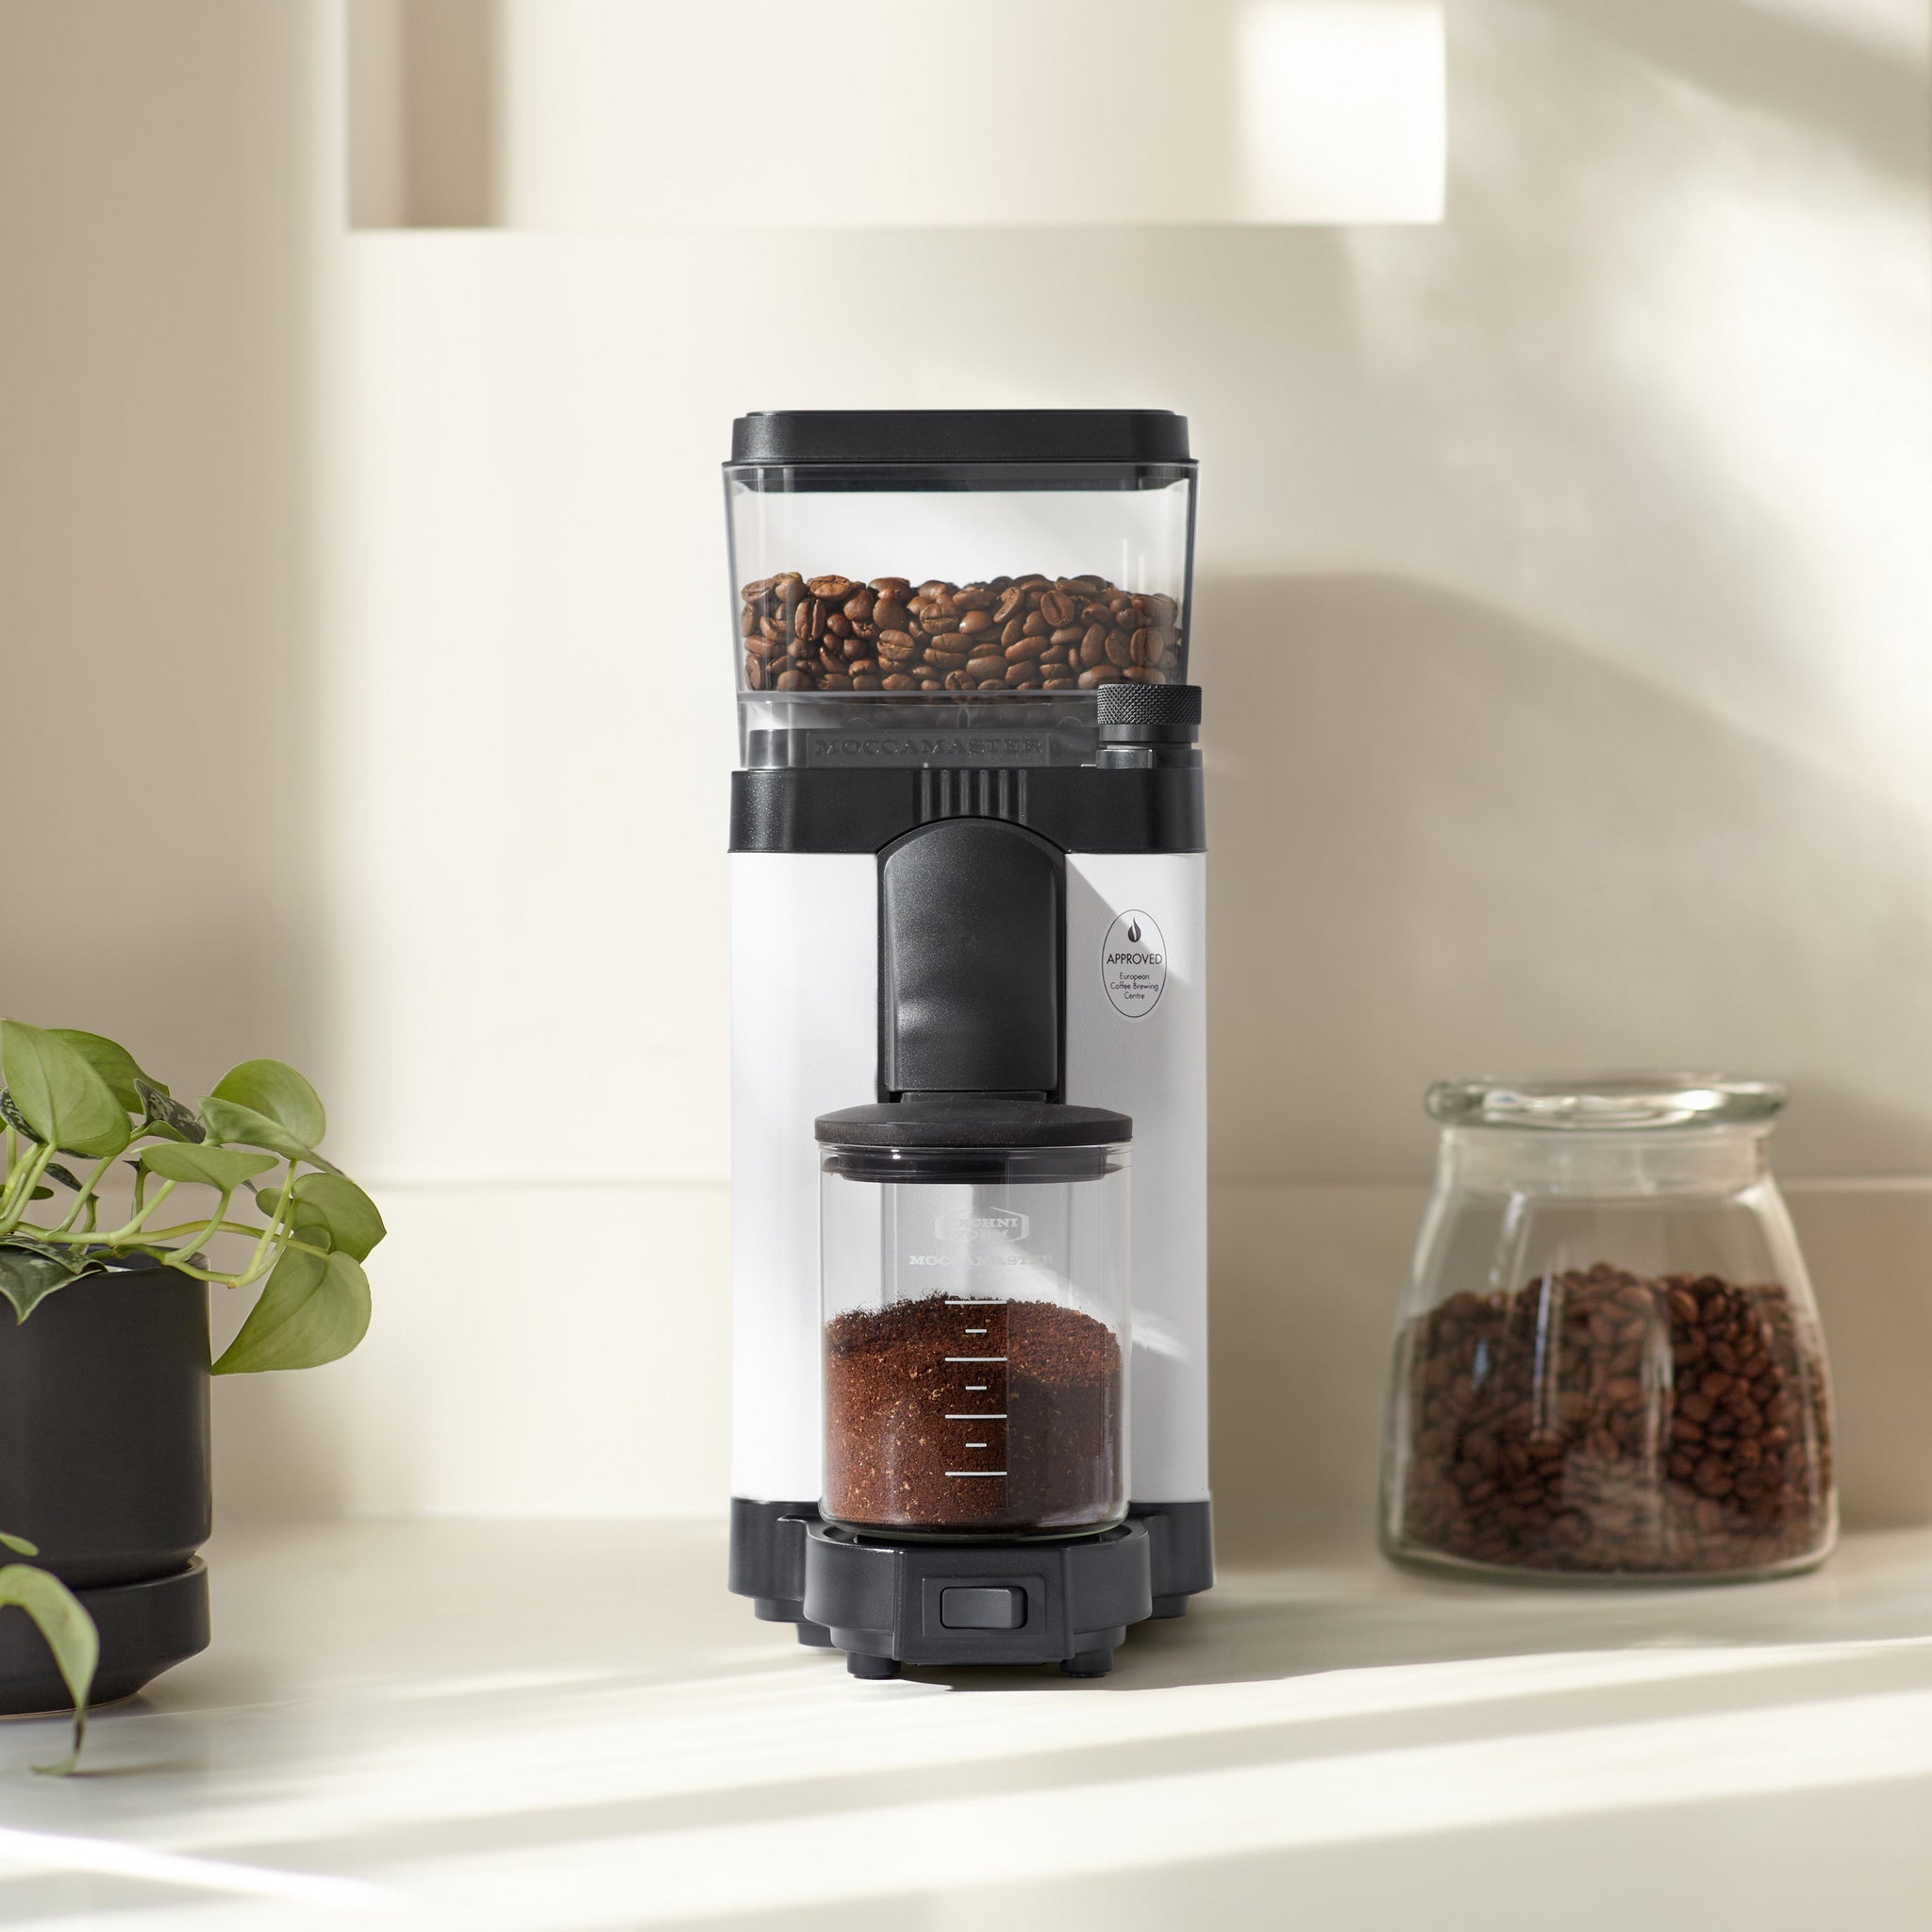 Review Of The Moccamaster KM5 Coffee Grinder 